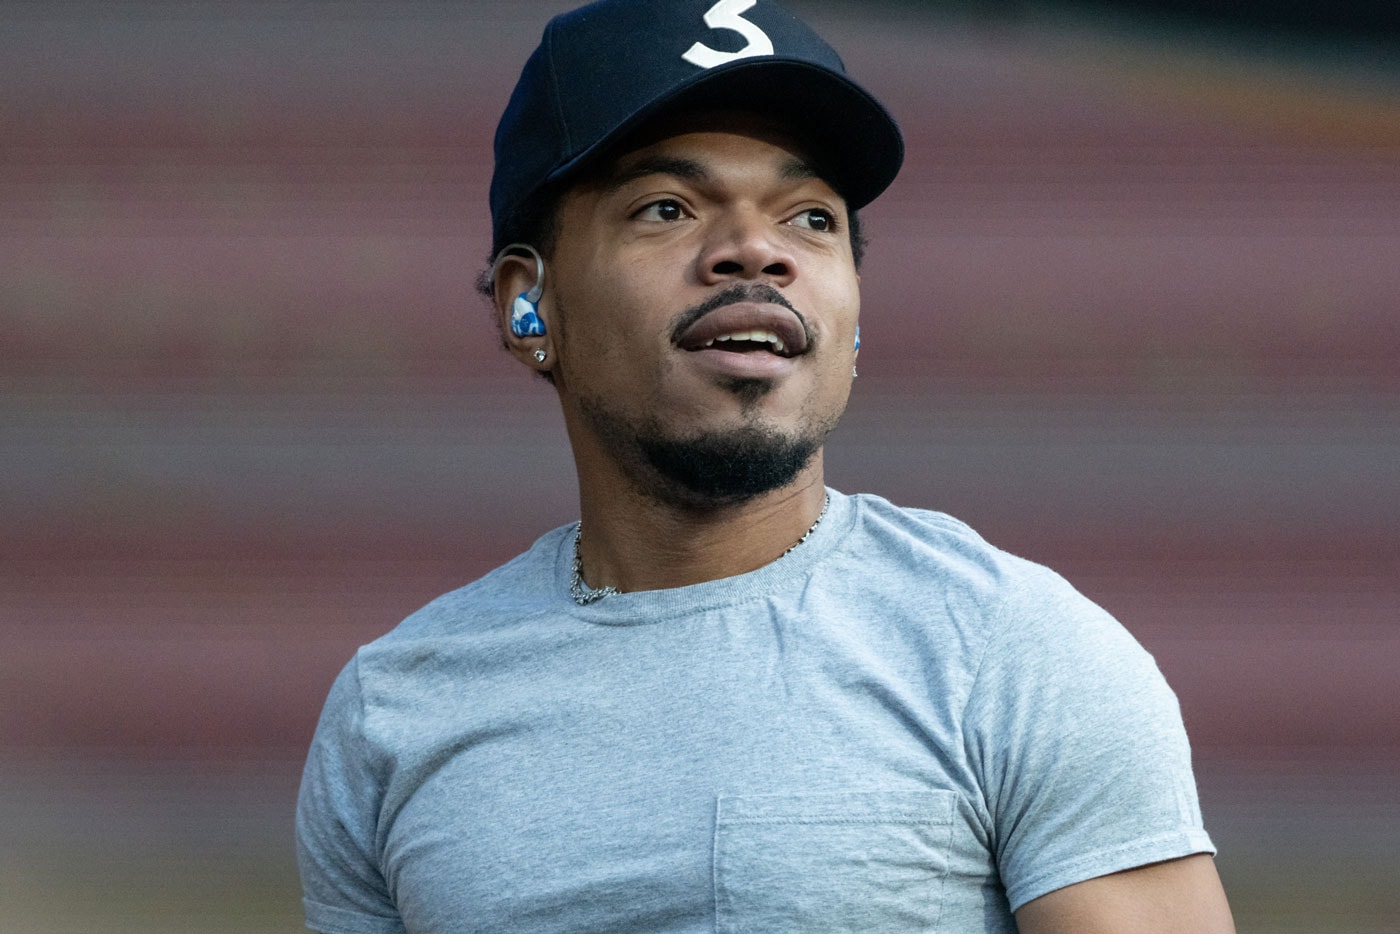 Chance The Rapper Performs As First Independent Artist Ever On 'Saturday Night Live'